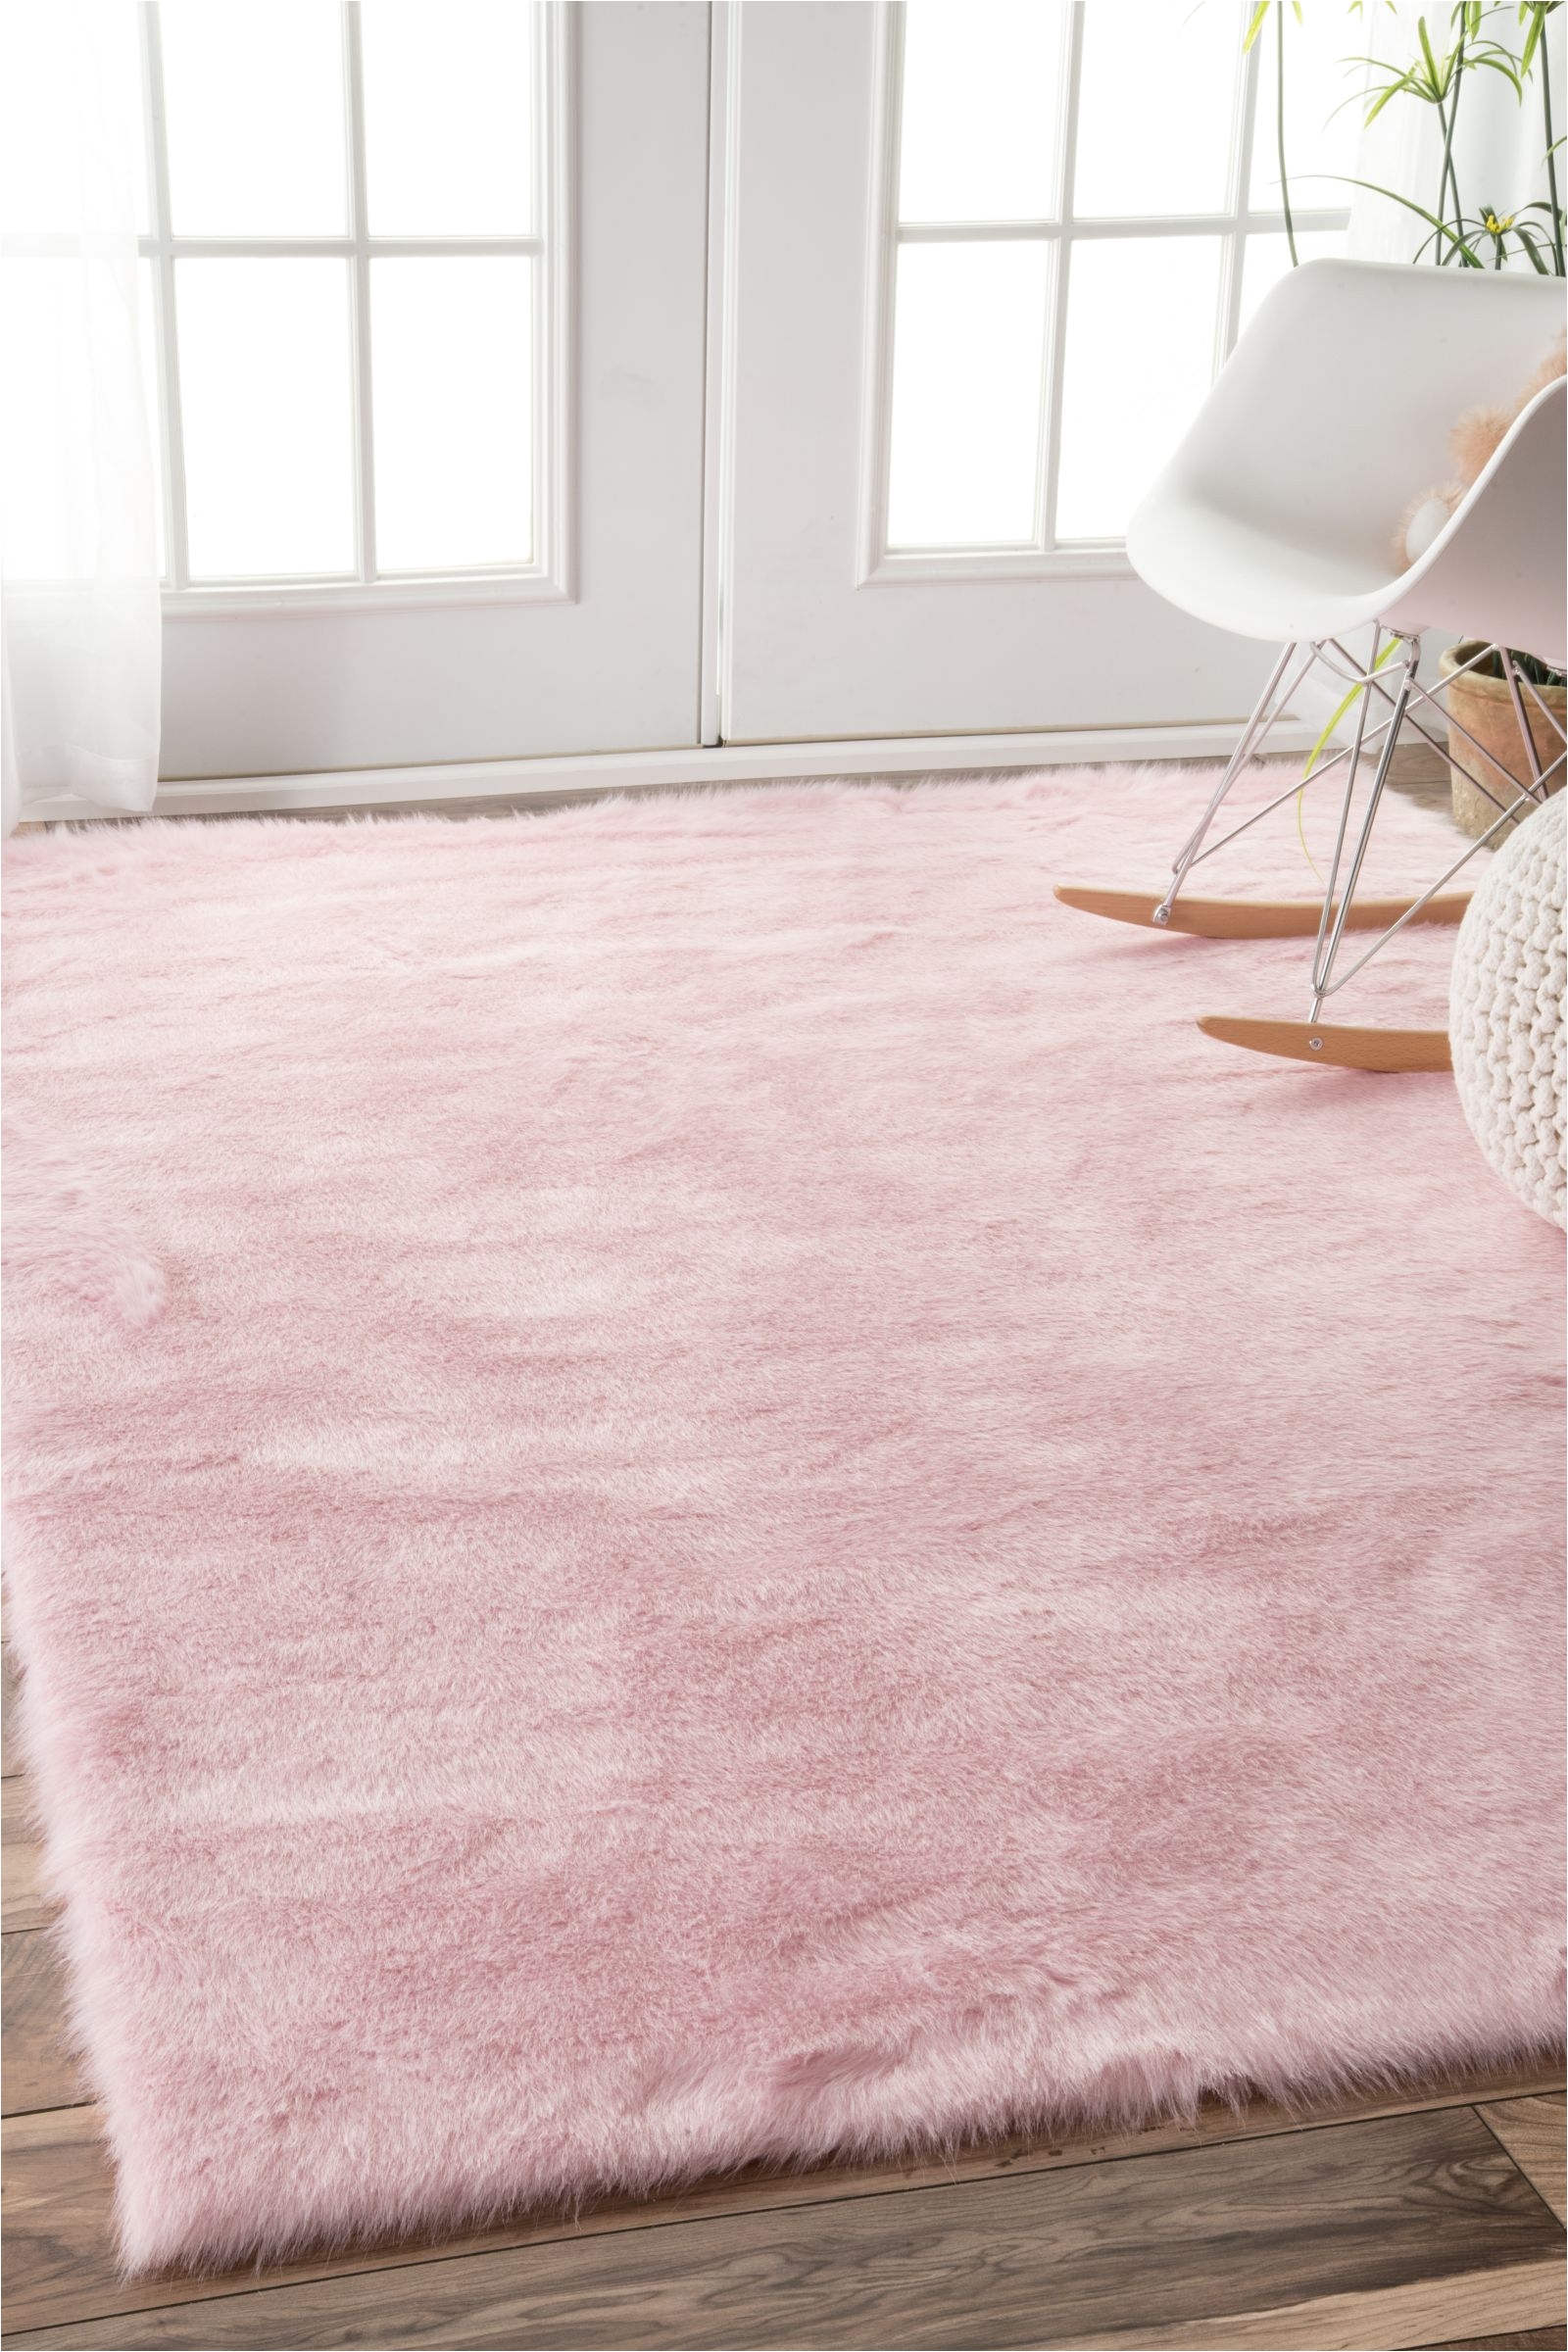 Round Pink Rugs for Nursery Rugs Usa area Rugs In Many Styles Including Contemporary Braided